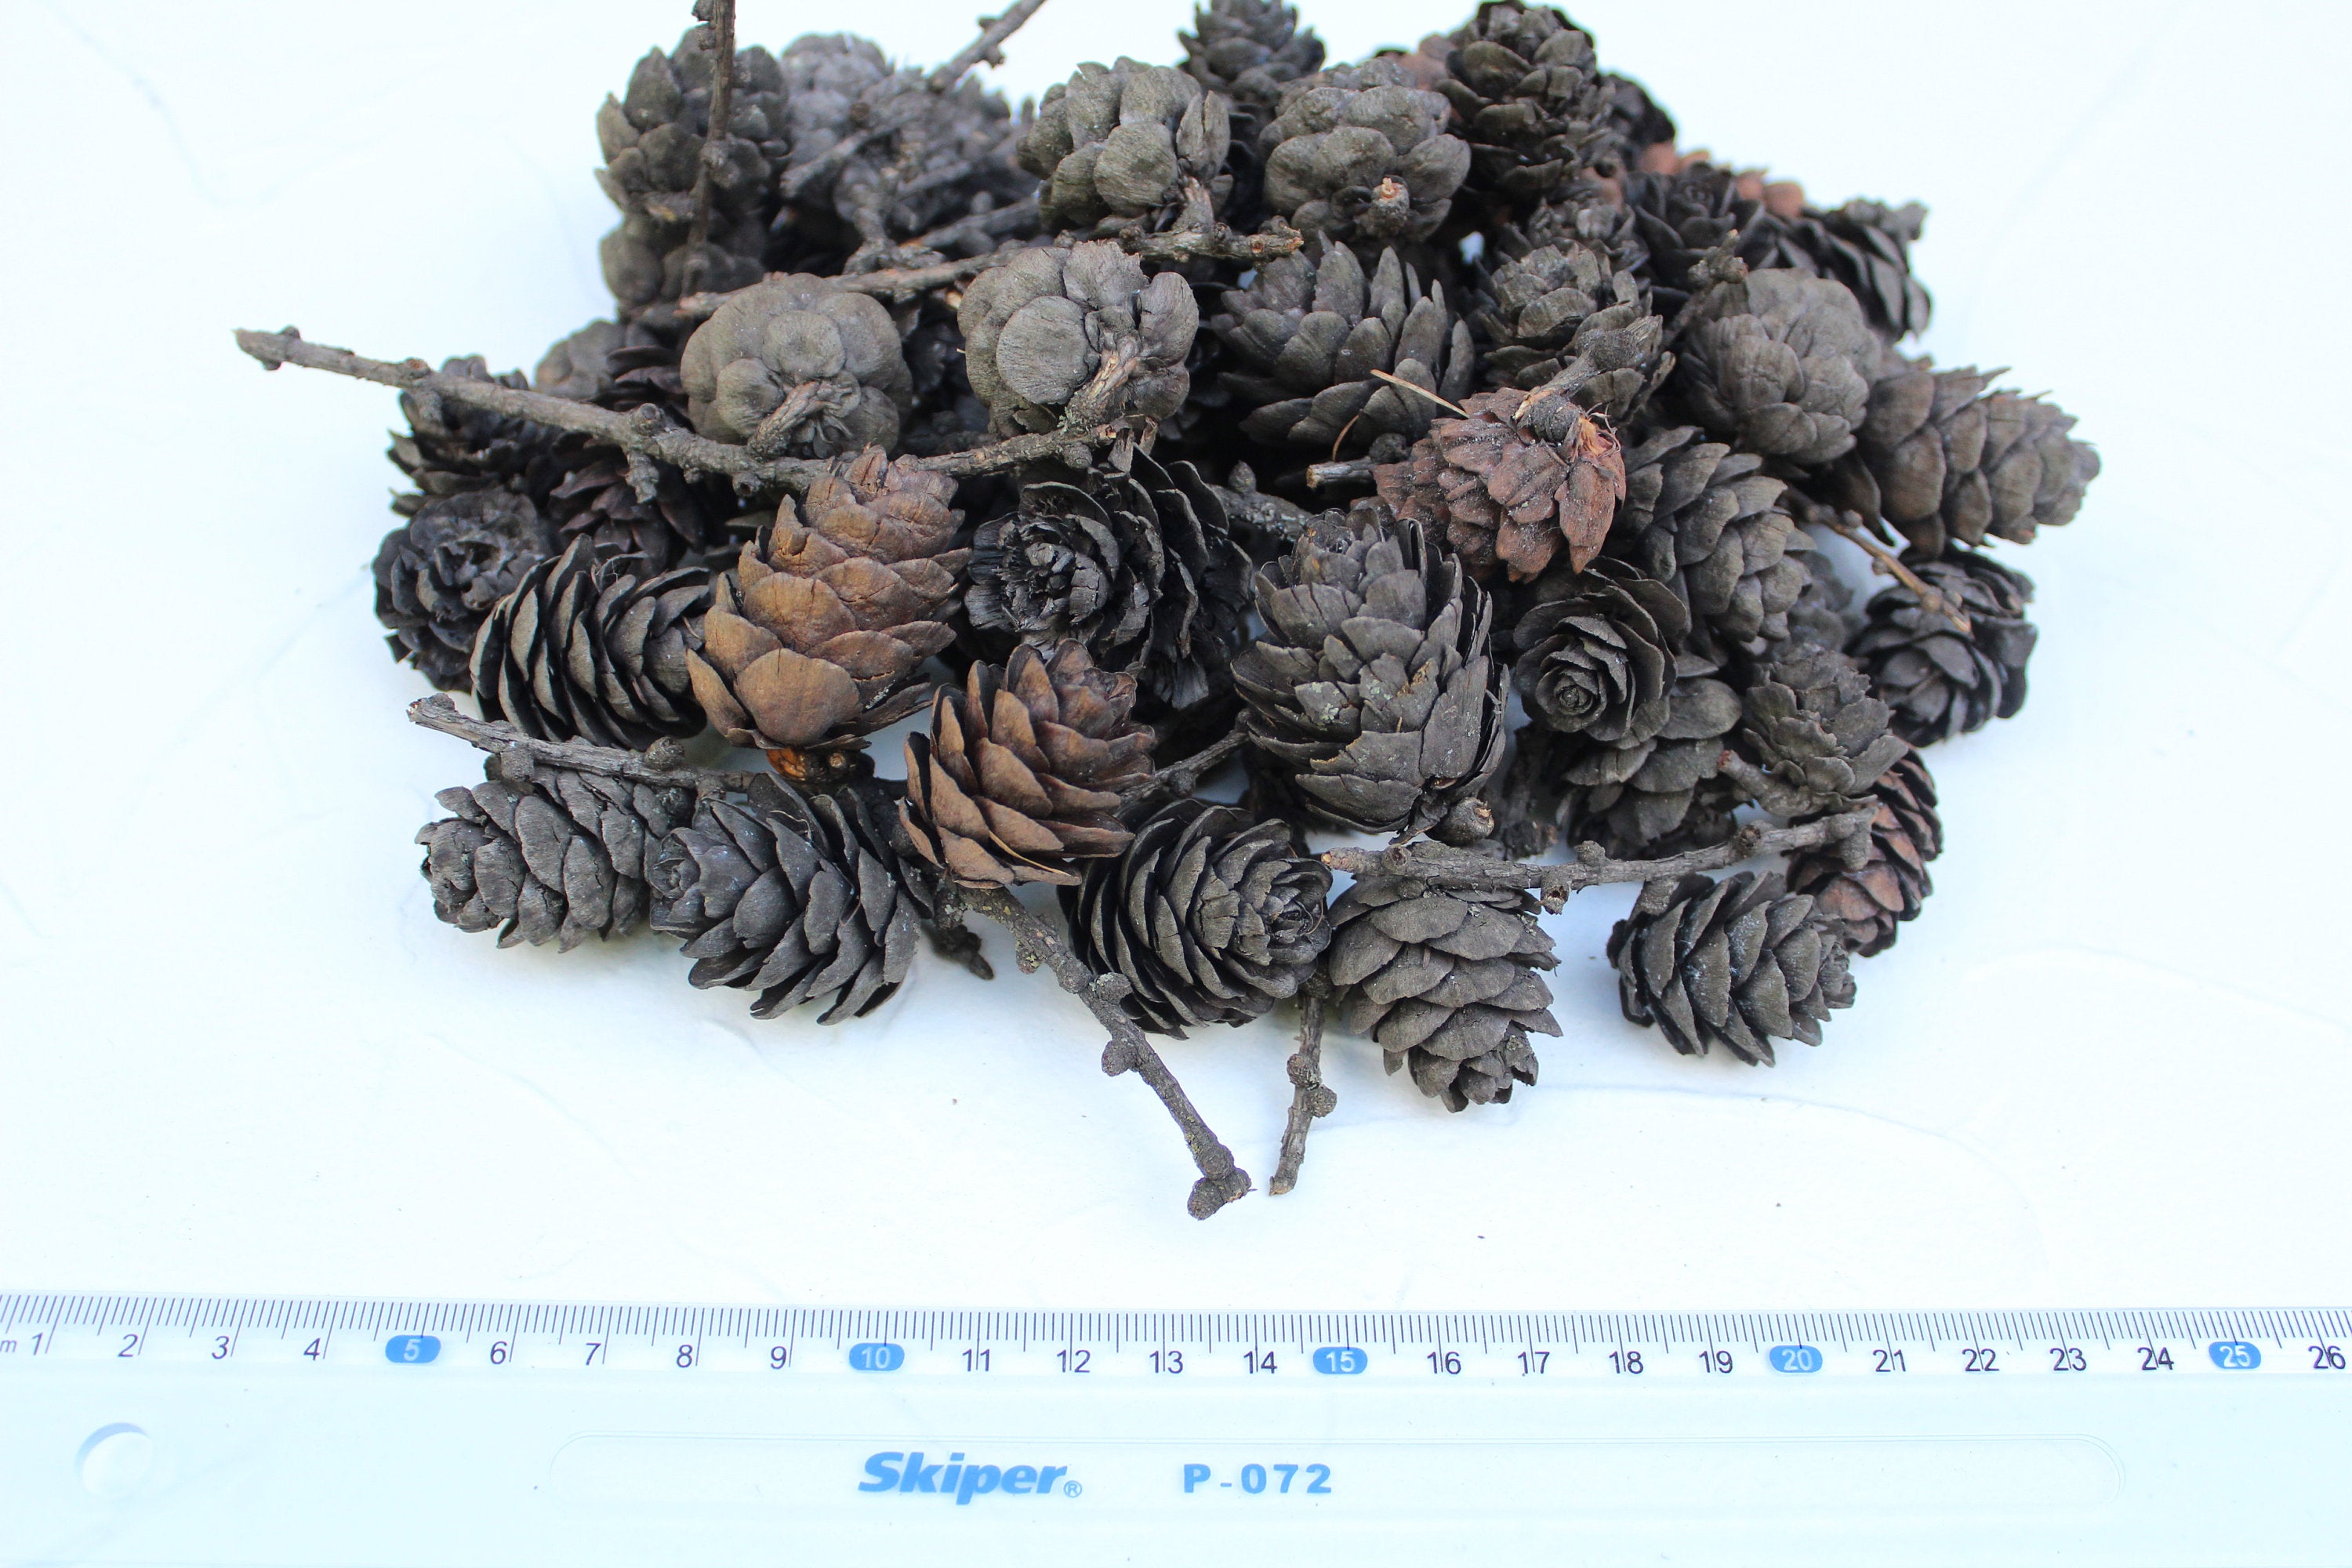 25 Dried Pine Cones, High Quality, Natural, Organic, Biodegraddable, Craft, Home Decoration, Christmas Decor